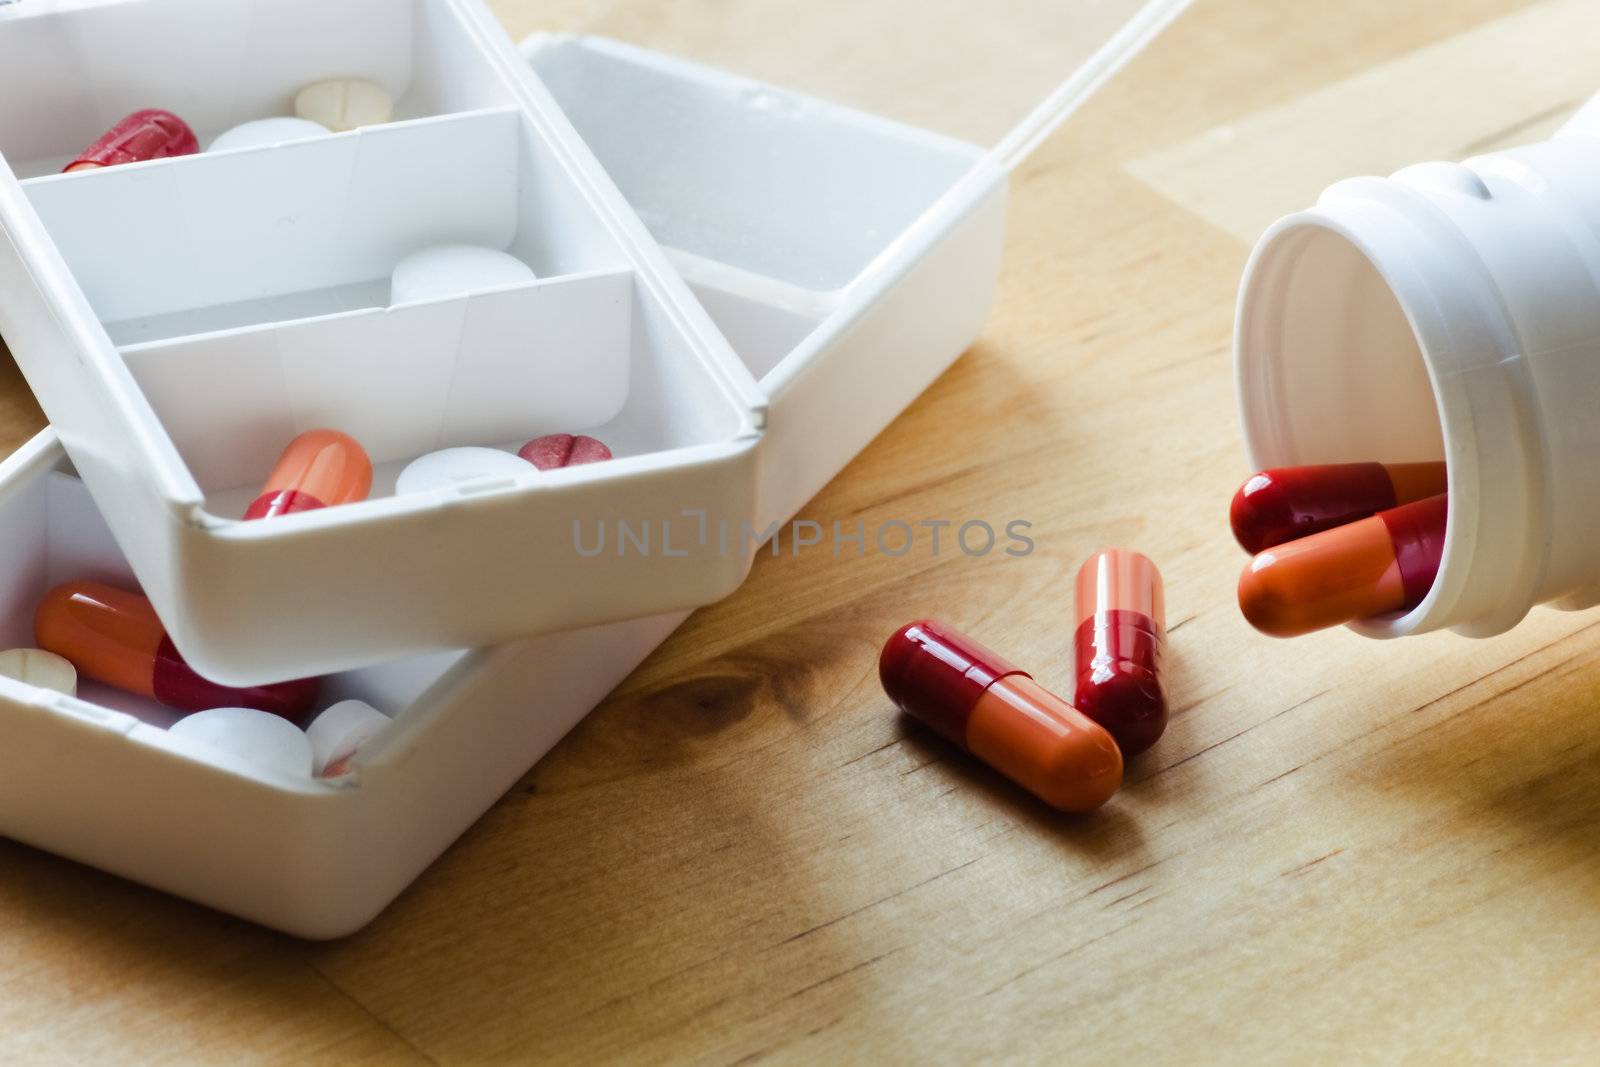 Pills, capsules and tablets sorted in pillbox by Colette